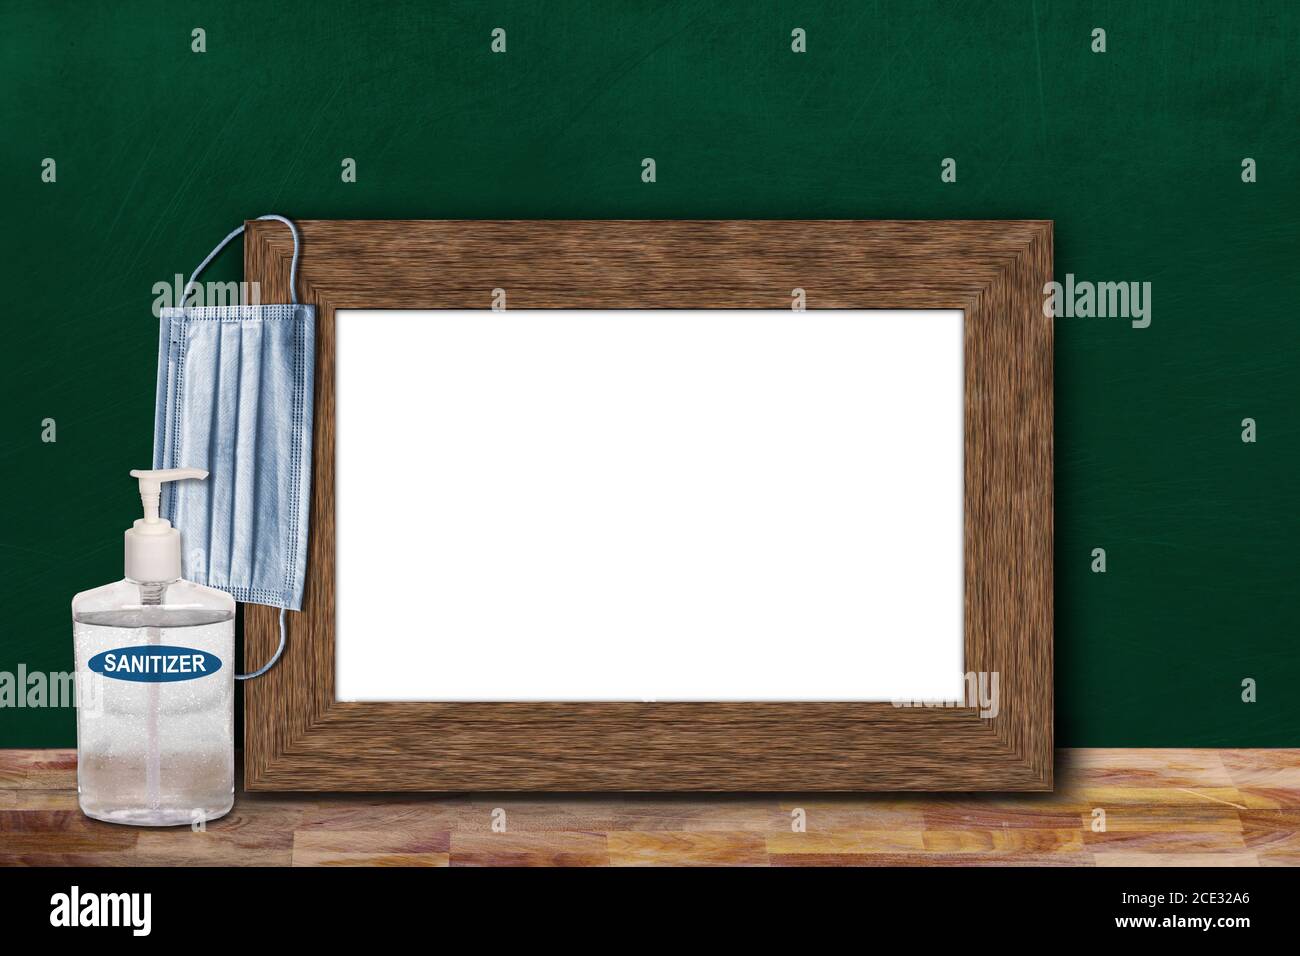 COVID-19 new normal education back to school concept in the classroom setting showing picture frame on chalkboard with copy space and face mask, hand Stock Photo